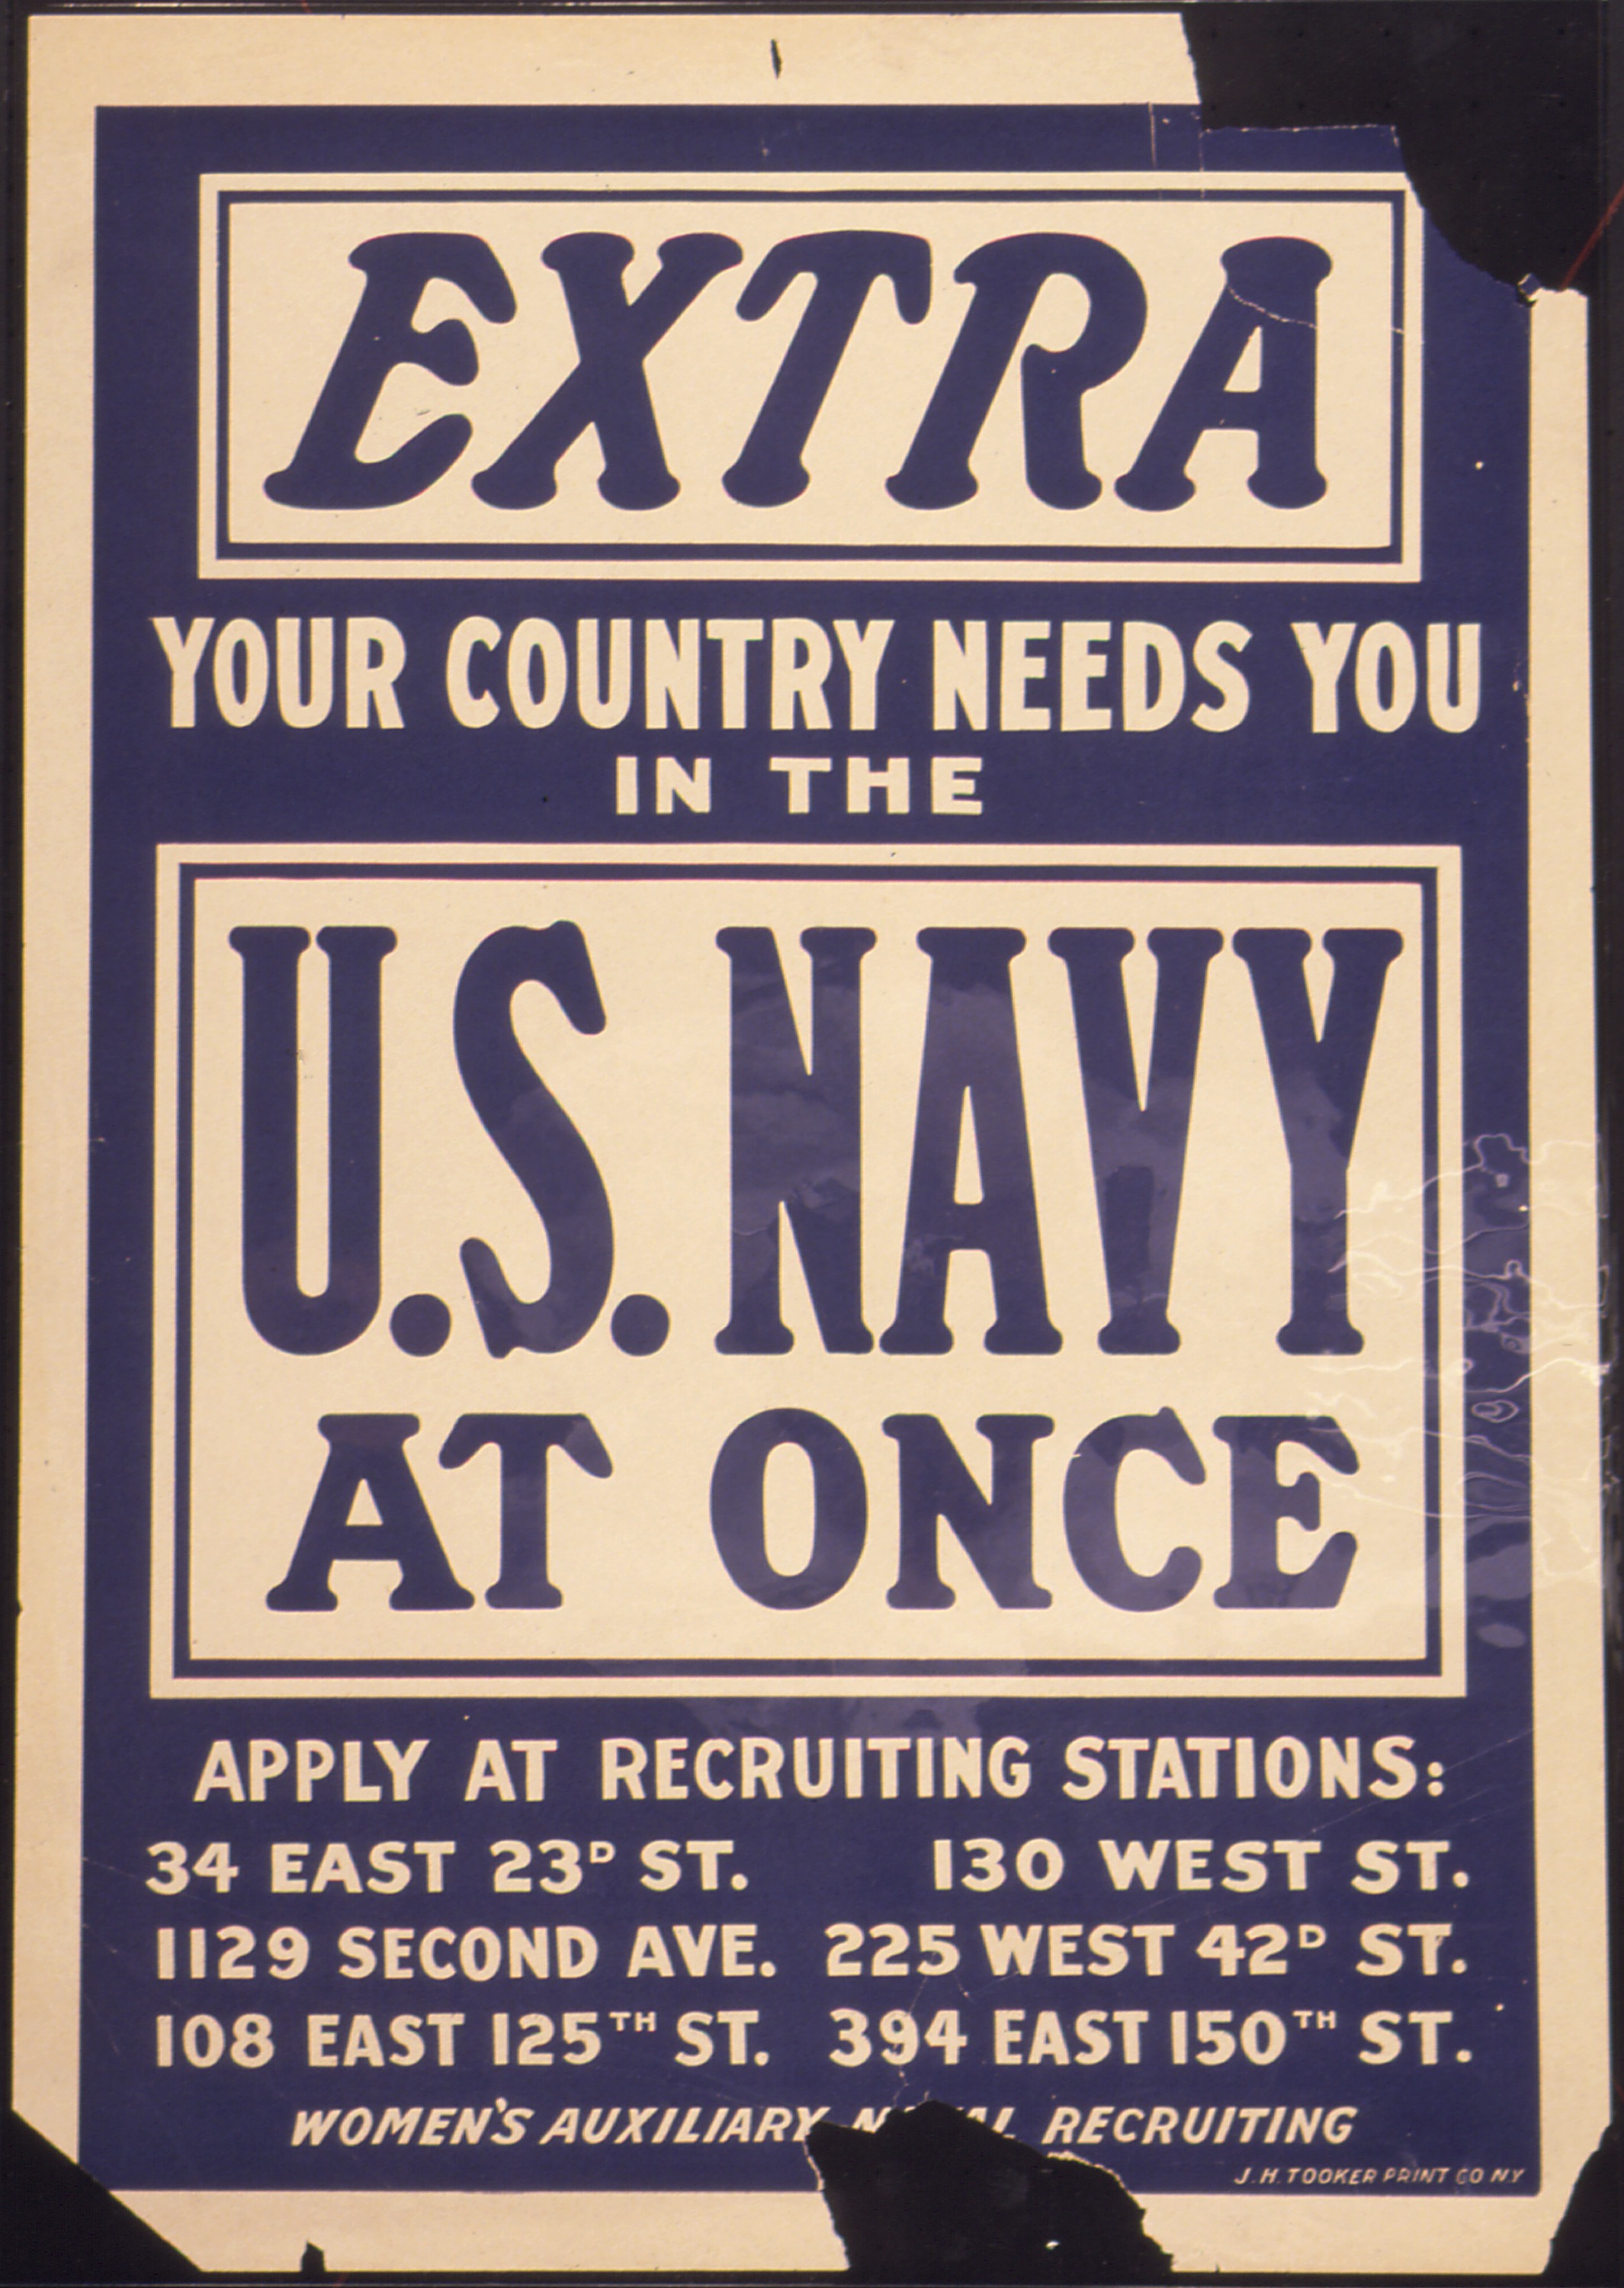 %22EXTRA._Your_Country_Needs_You_In_The_U.S._Navt_At_Once._Apply_at_Recruiting_Stations-_34_East_23rd_St.%2C_130_West_St.%2C_1_-_NARA_-_512474.jpg